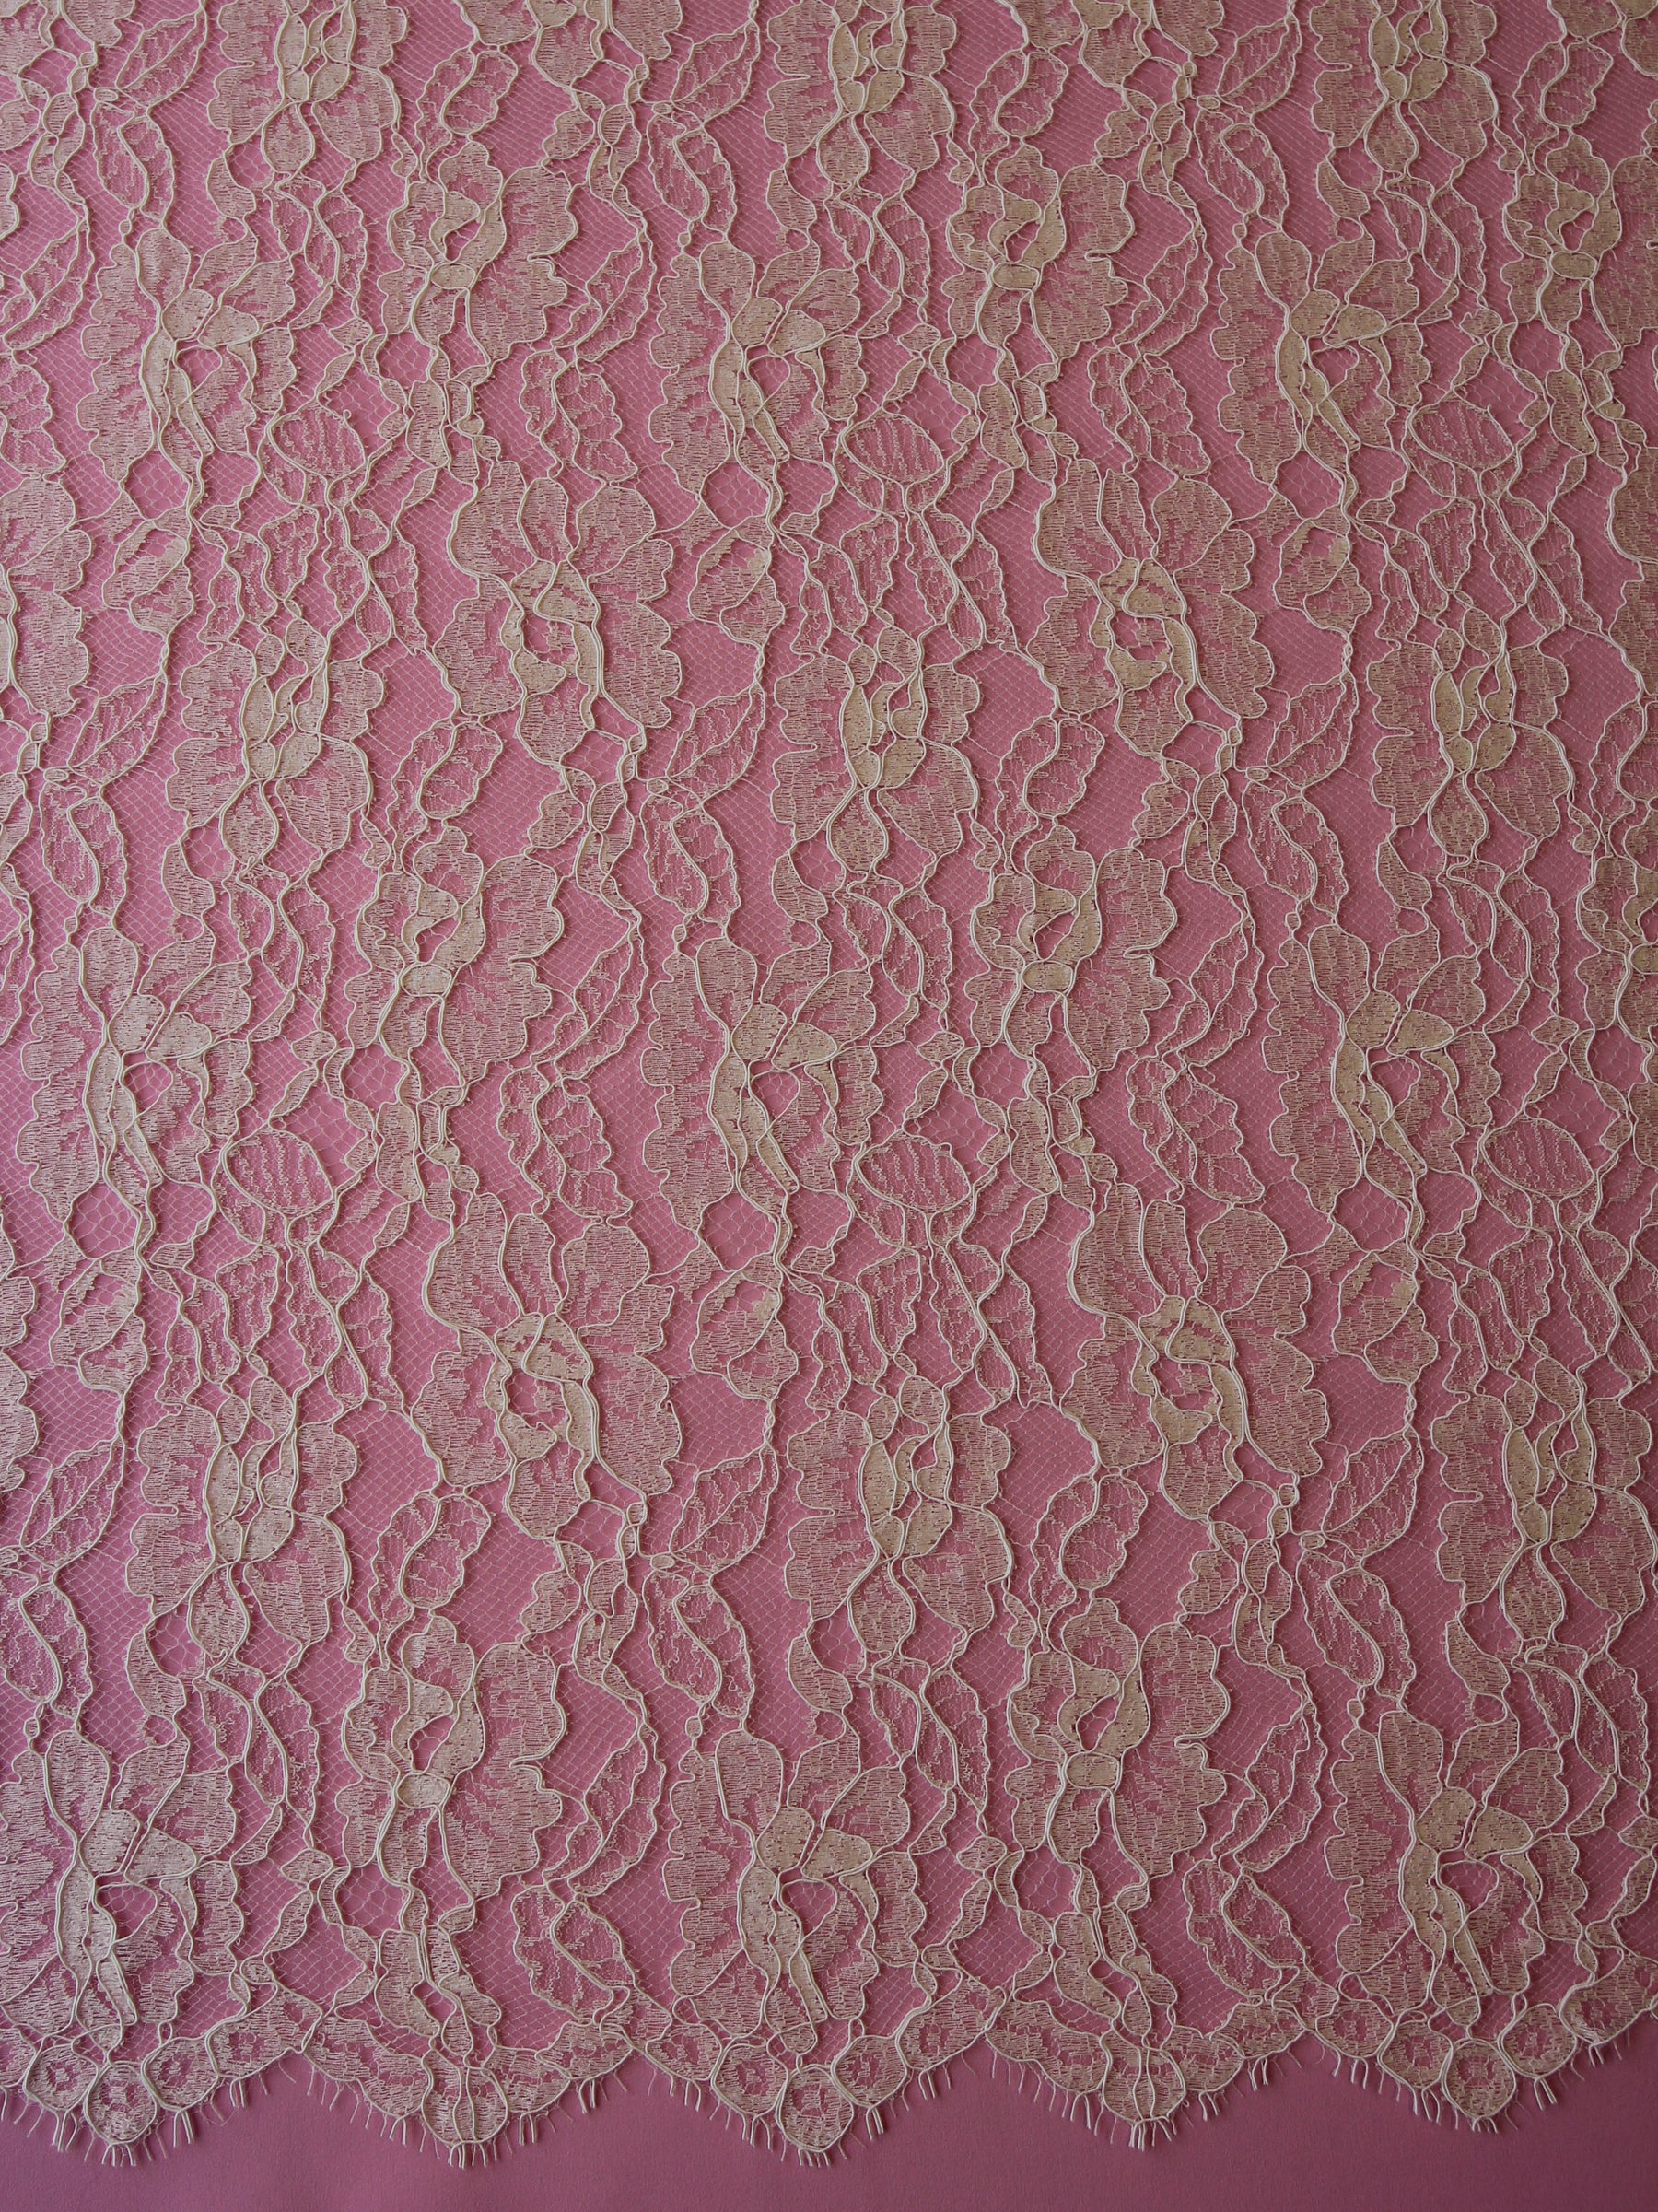 Chantilly Lace, French Chantilly, Roses Lace, 36 wide, Ivory